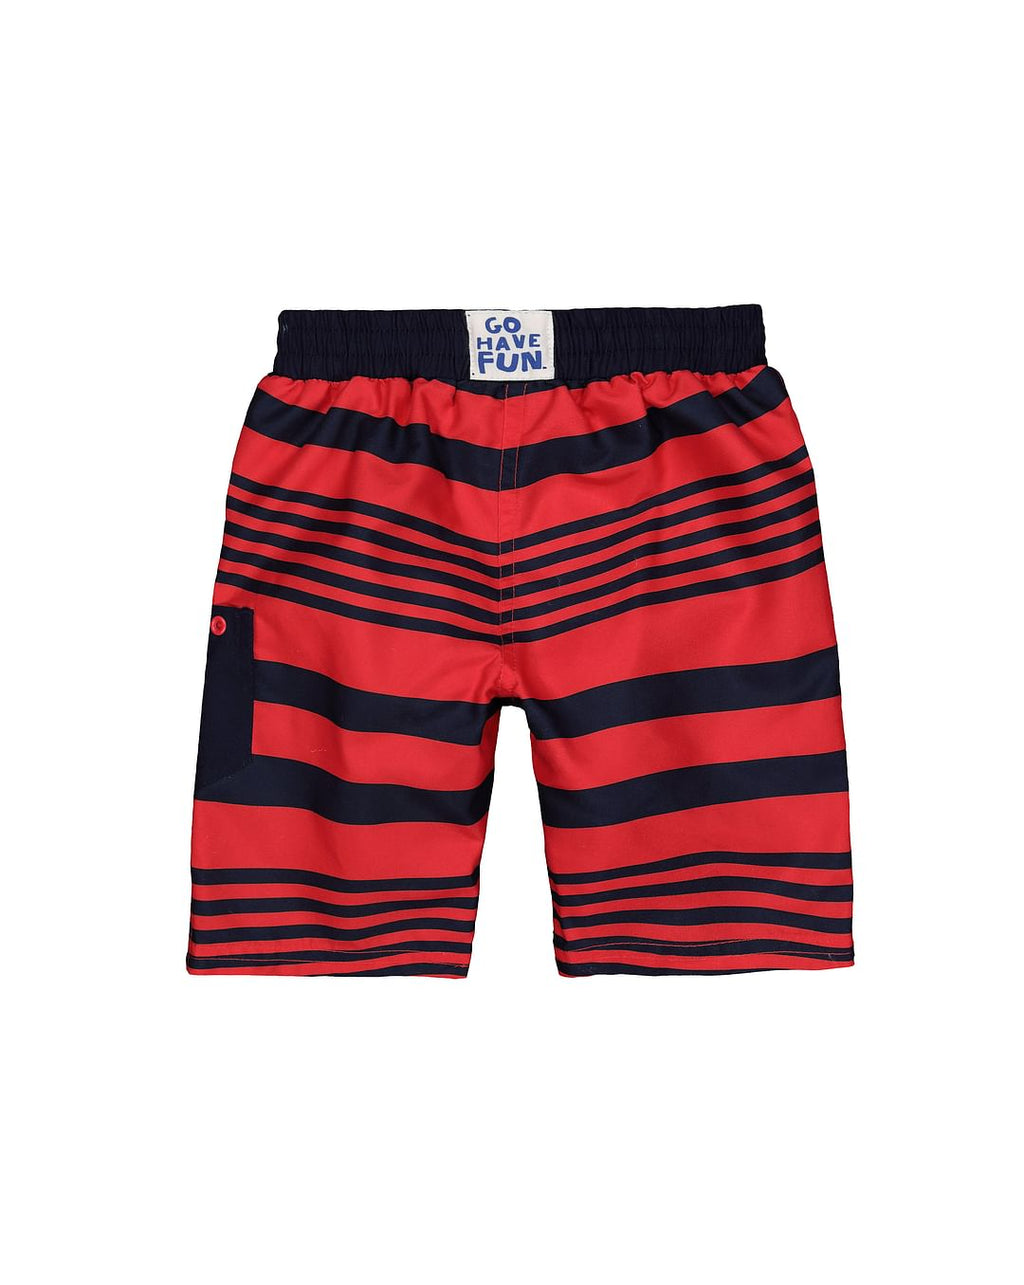 The Beach Company India - Buy printed swim shorts online - kids swimwear - boys swimming shorts - swimming costume for young boys - Navy And Red Stripe Swim Shorts